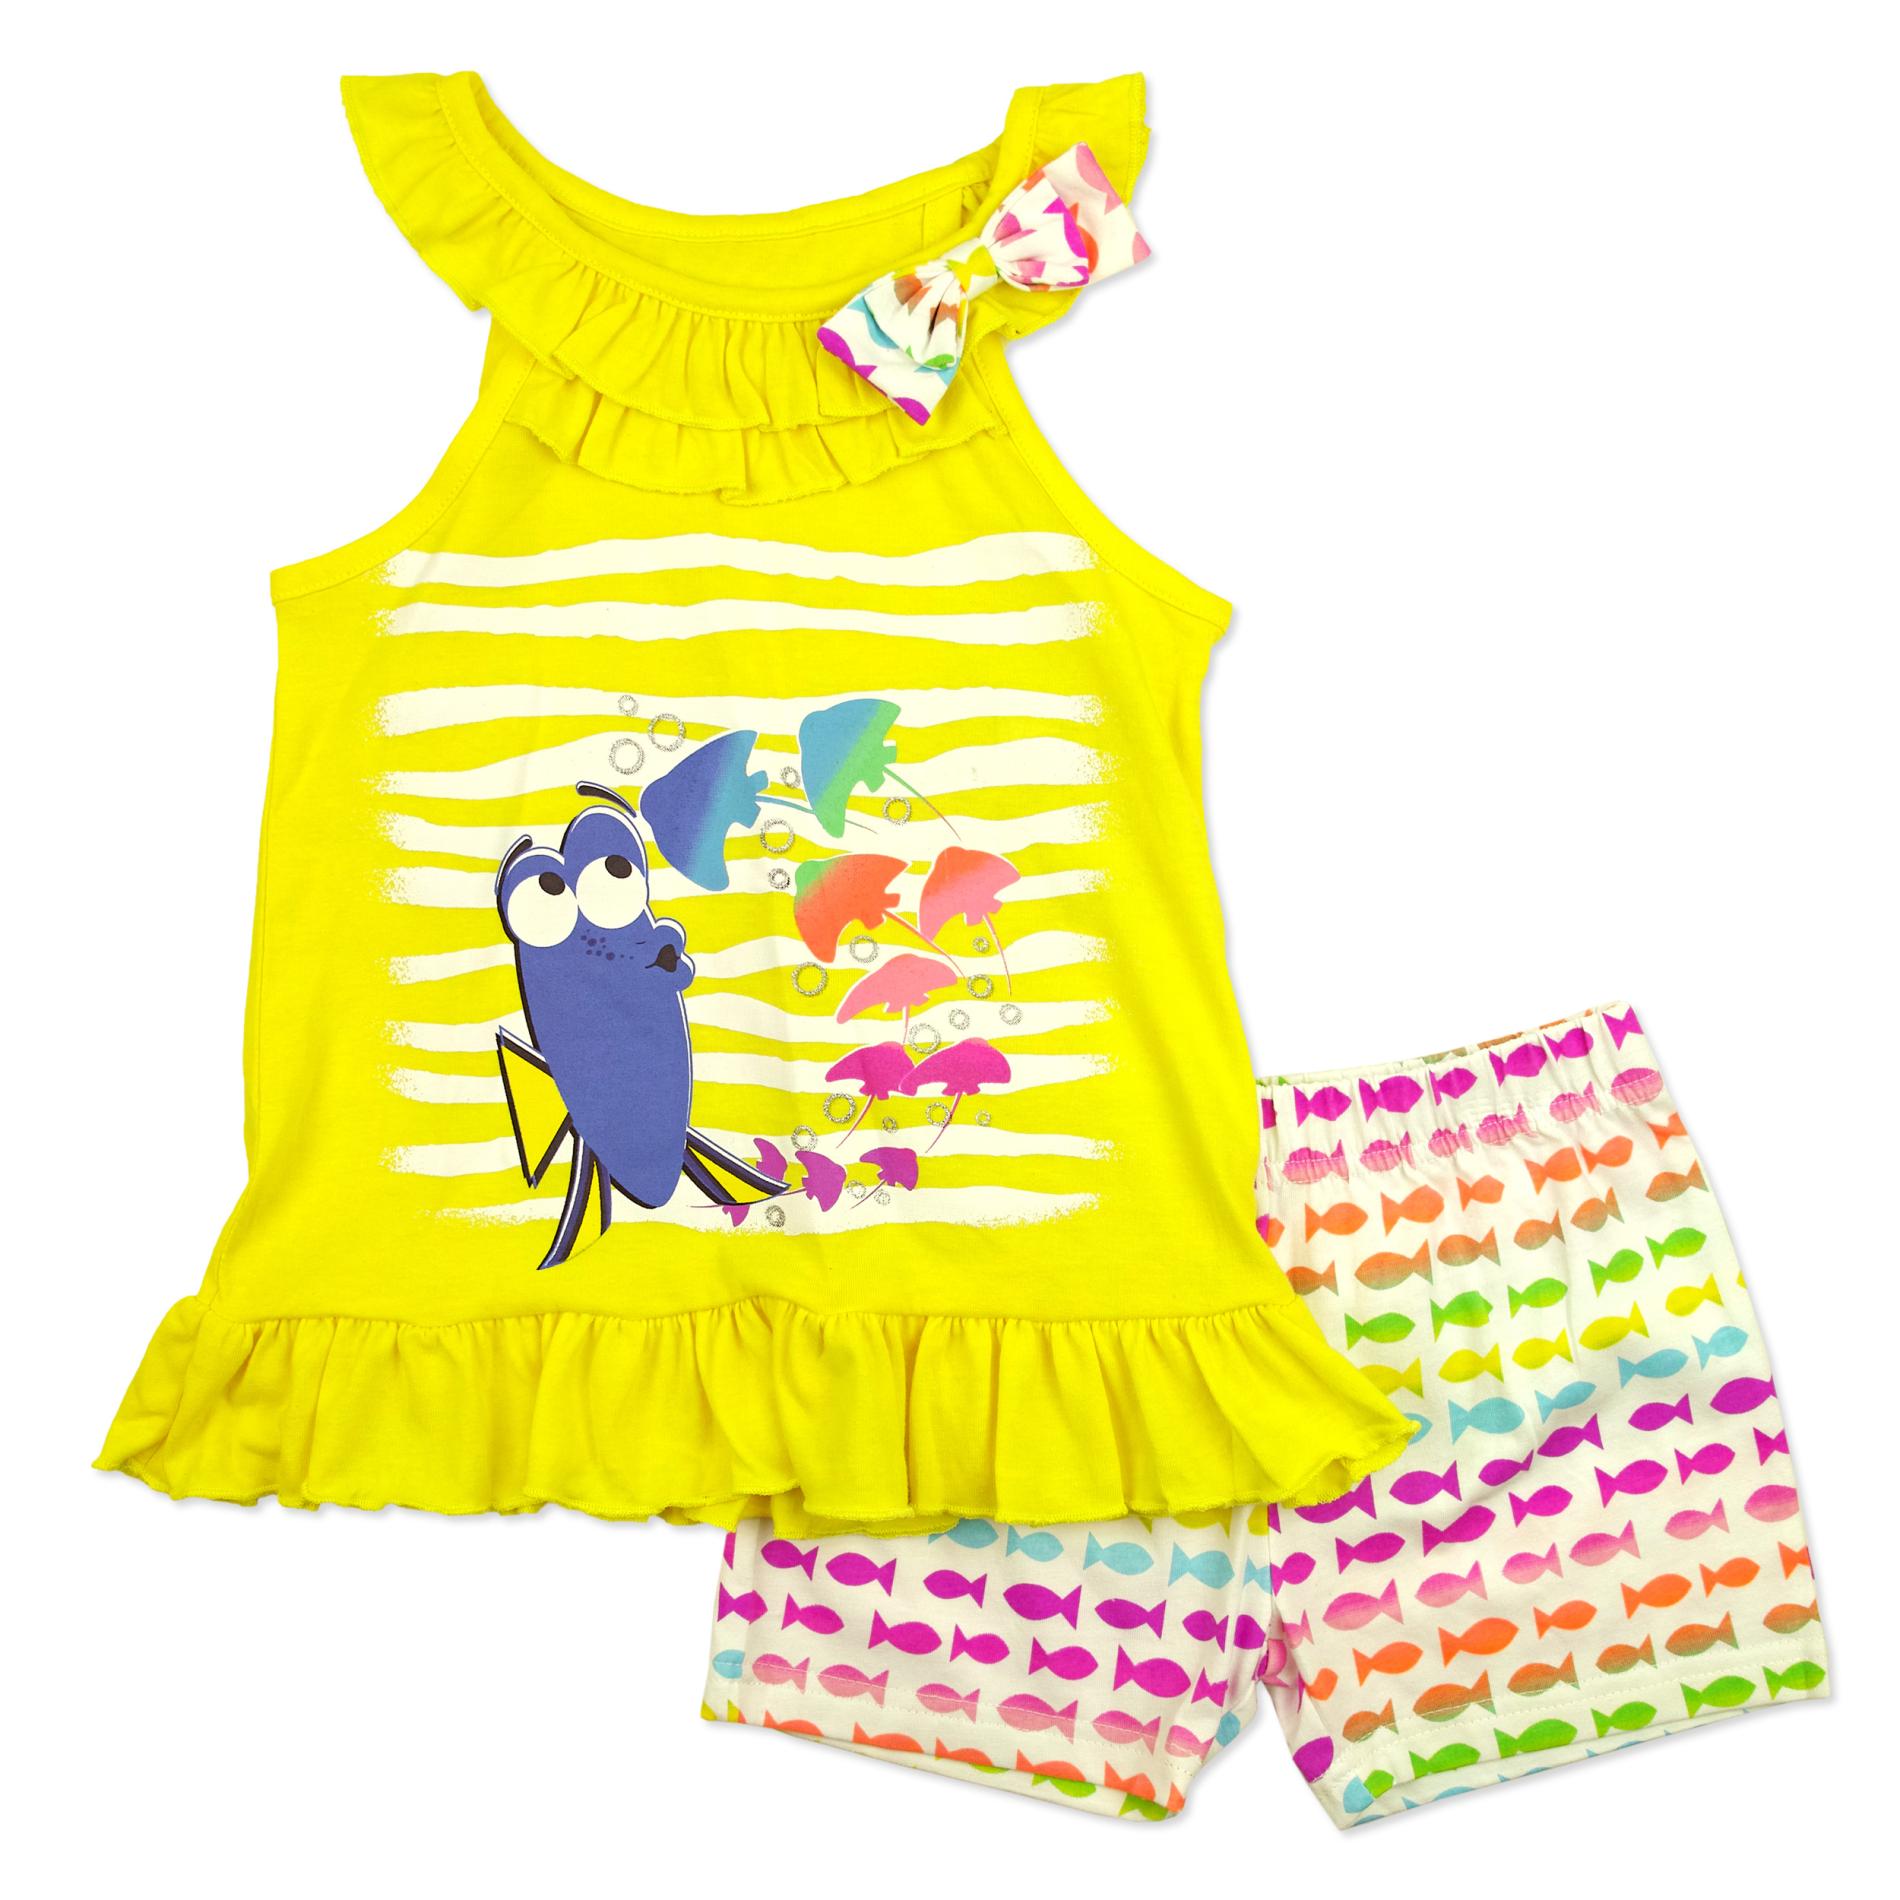 Disney Finding Nemo Girl's Top and Shorts - Dory